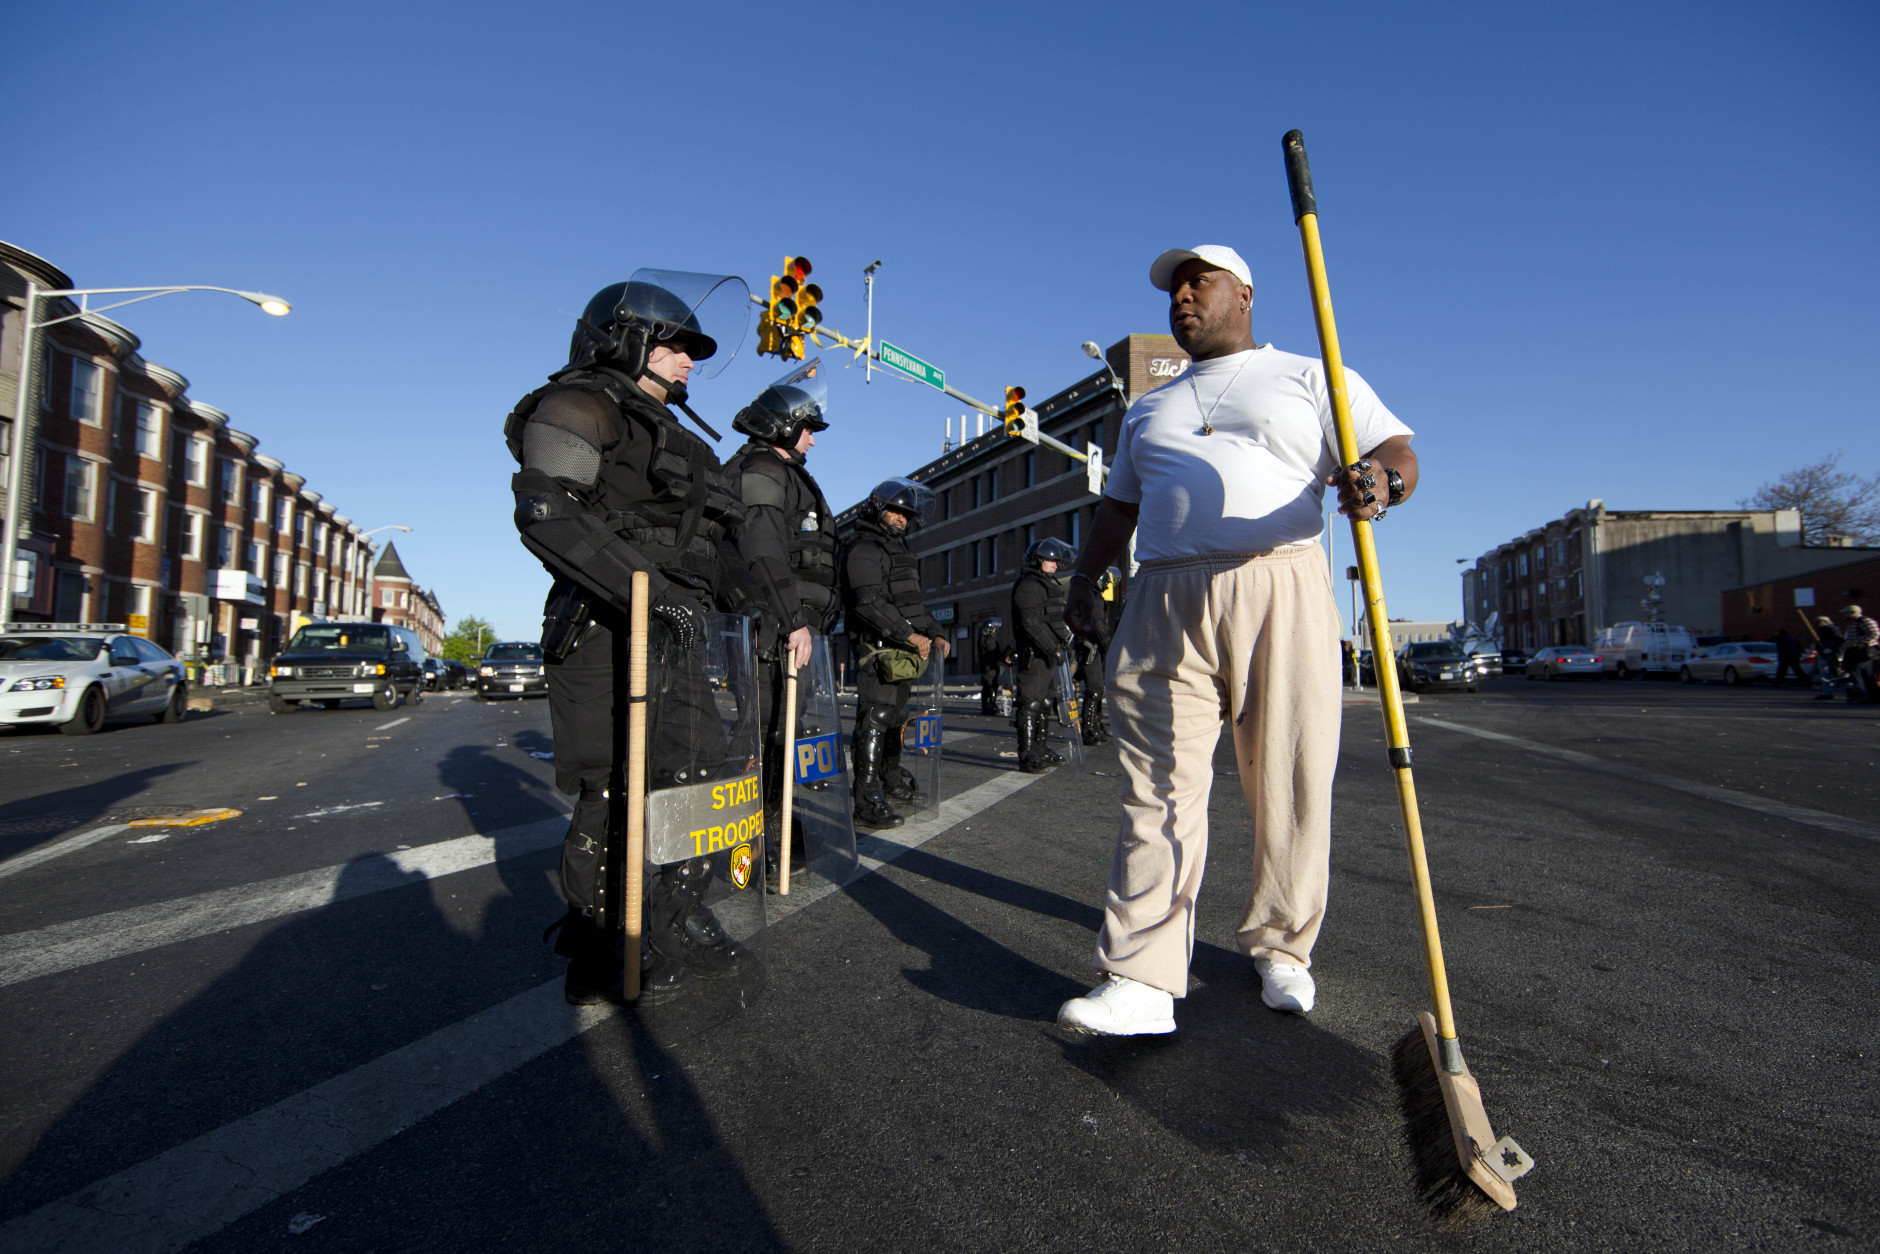 Victor Huntley-el thanks law enforcement officers as they stand guard, Tuesday, April 28, 2015, in Baltimore, in the aftermath of rioting following Monday's funeral for Freddie Gray, who died in police custody. (AP Photo/Matt Rourke)